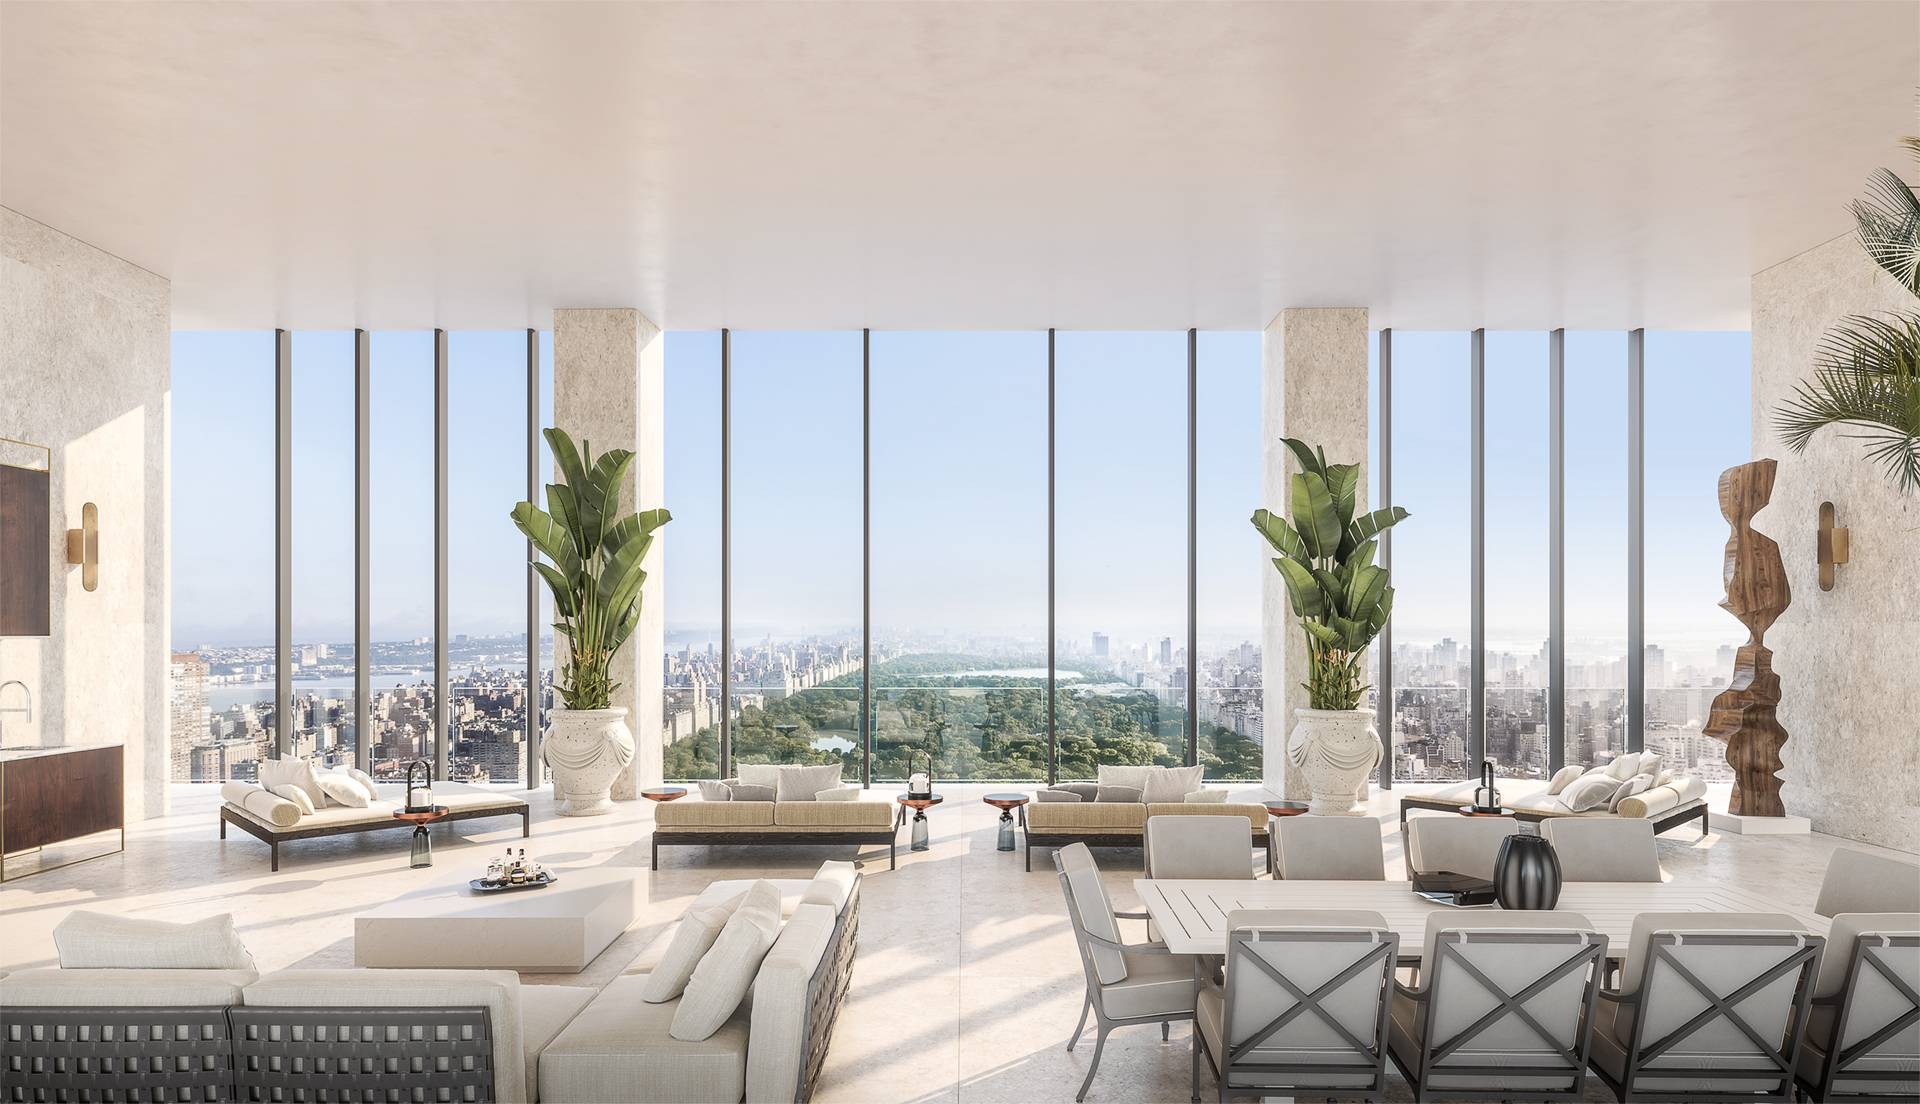 CLOSINGS HAVE COMMENCED. Triplex Penthouse 72 is a spectacular, one of a kind residence that offers the grandeur of expansive indoor outdoor living across three full floors, all with breathtaking, ...